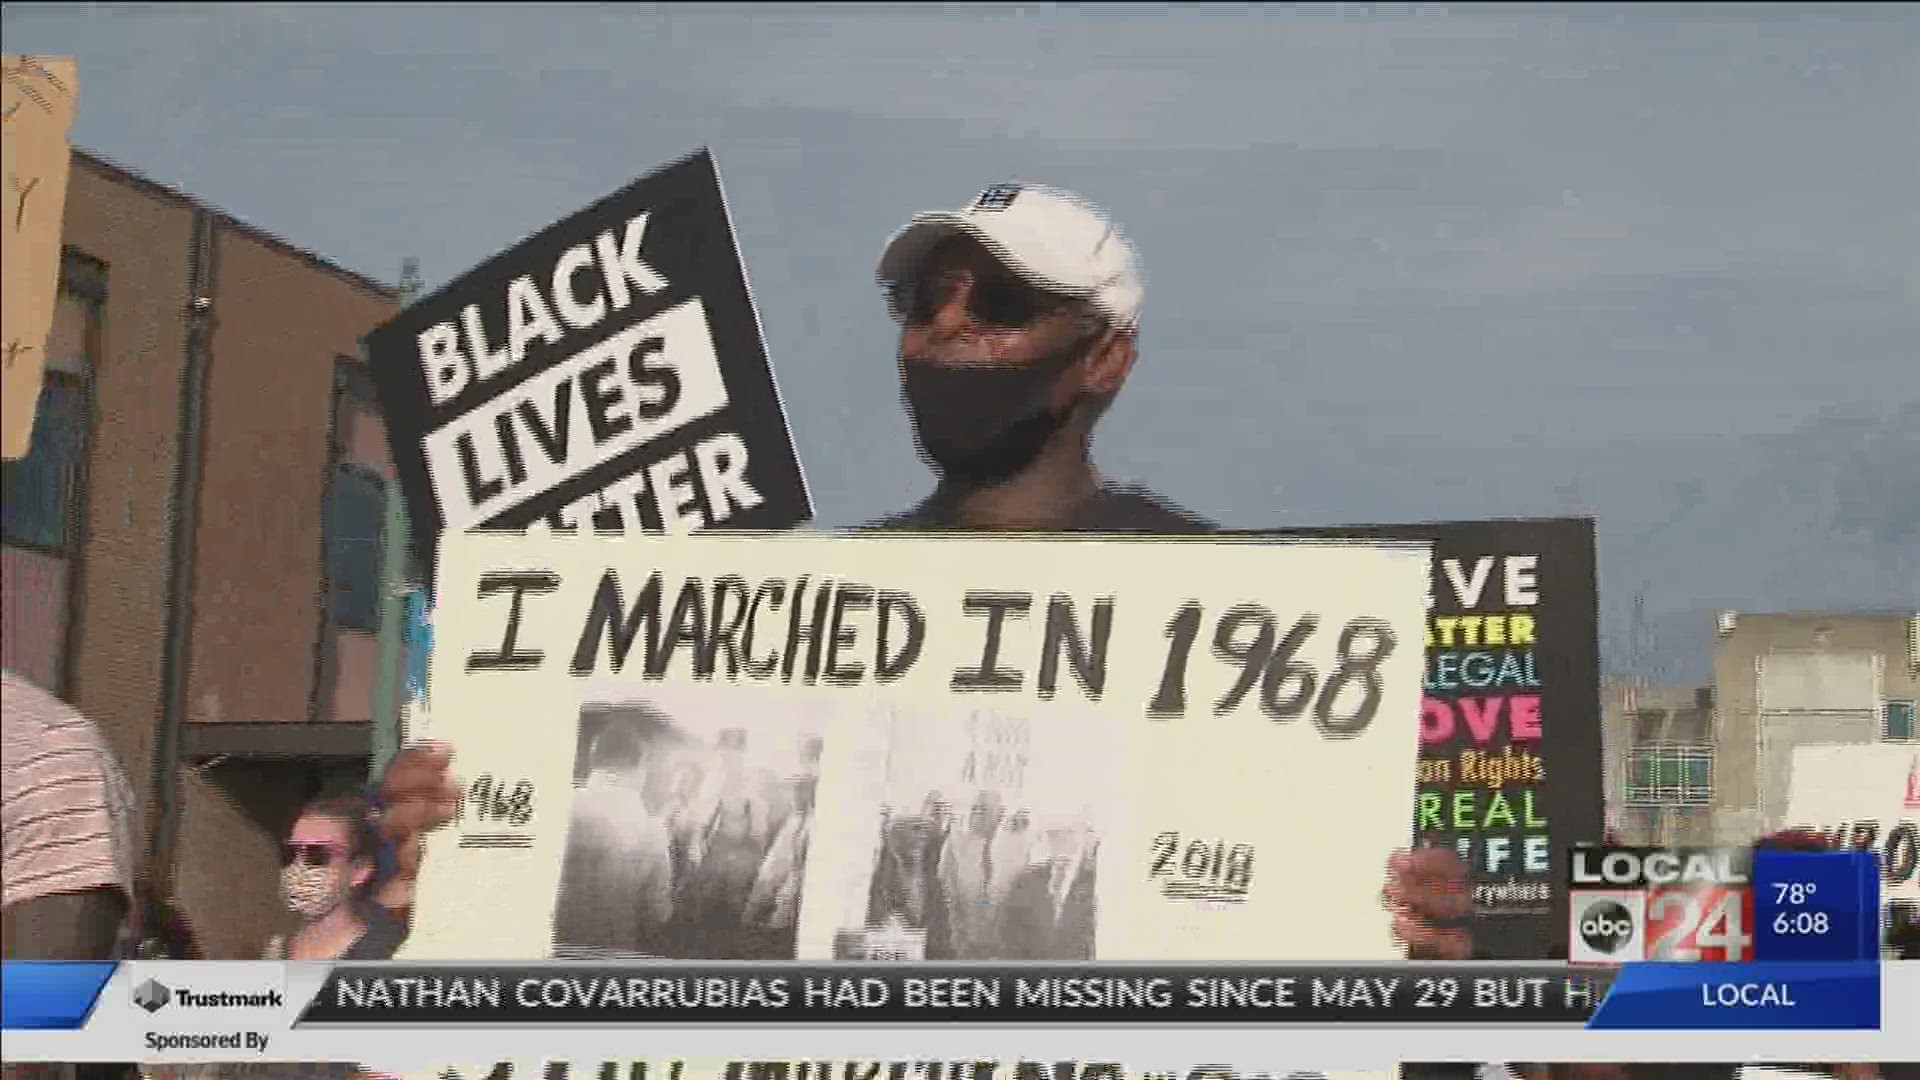 Joe Calhoun marched in the sanitation workers strike in Memphis in 1968 and protest marches of 2020